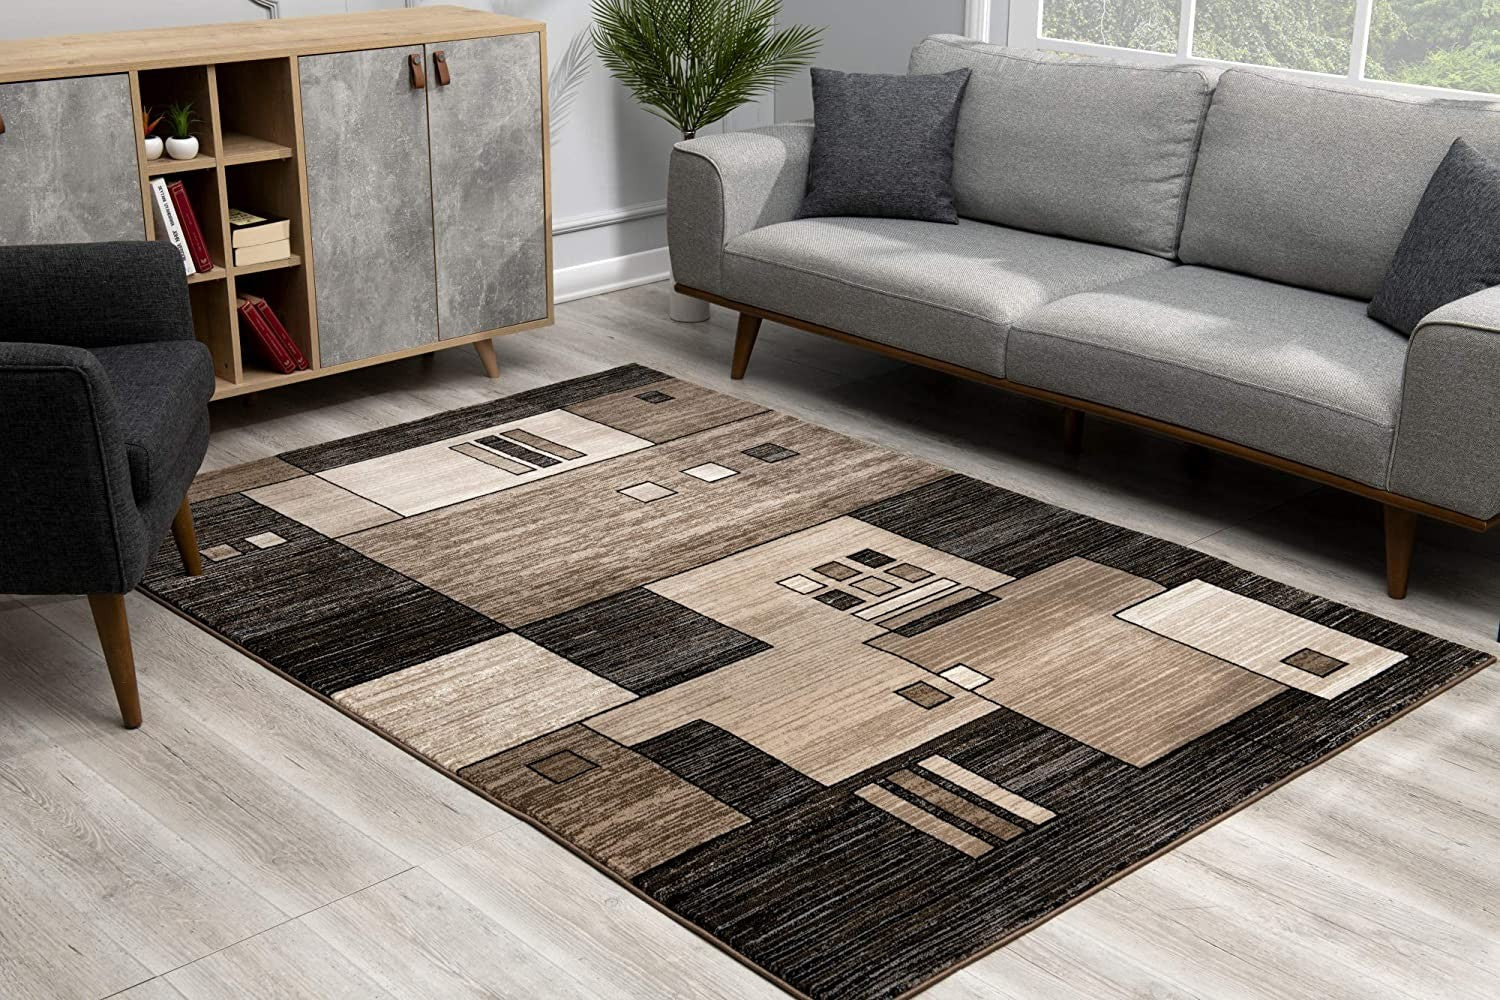 5' X 7' Beige Abstract Dhurrie Area Rug